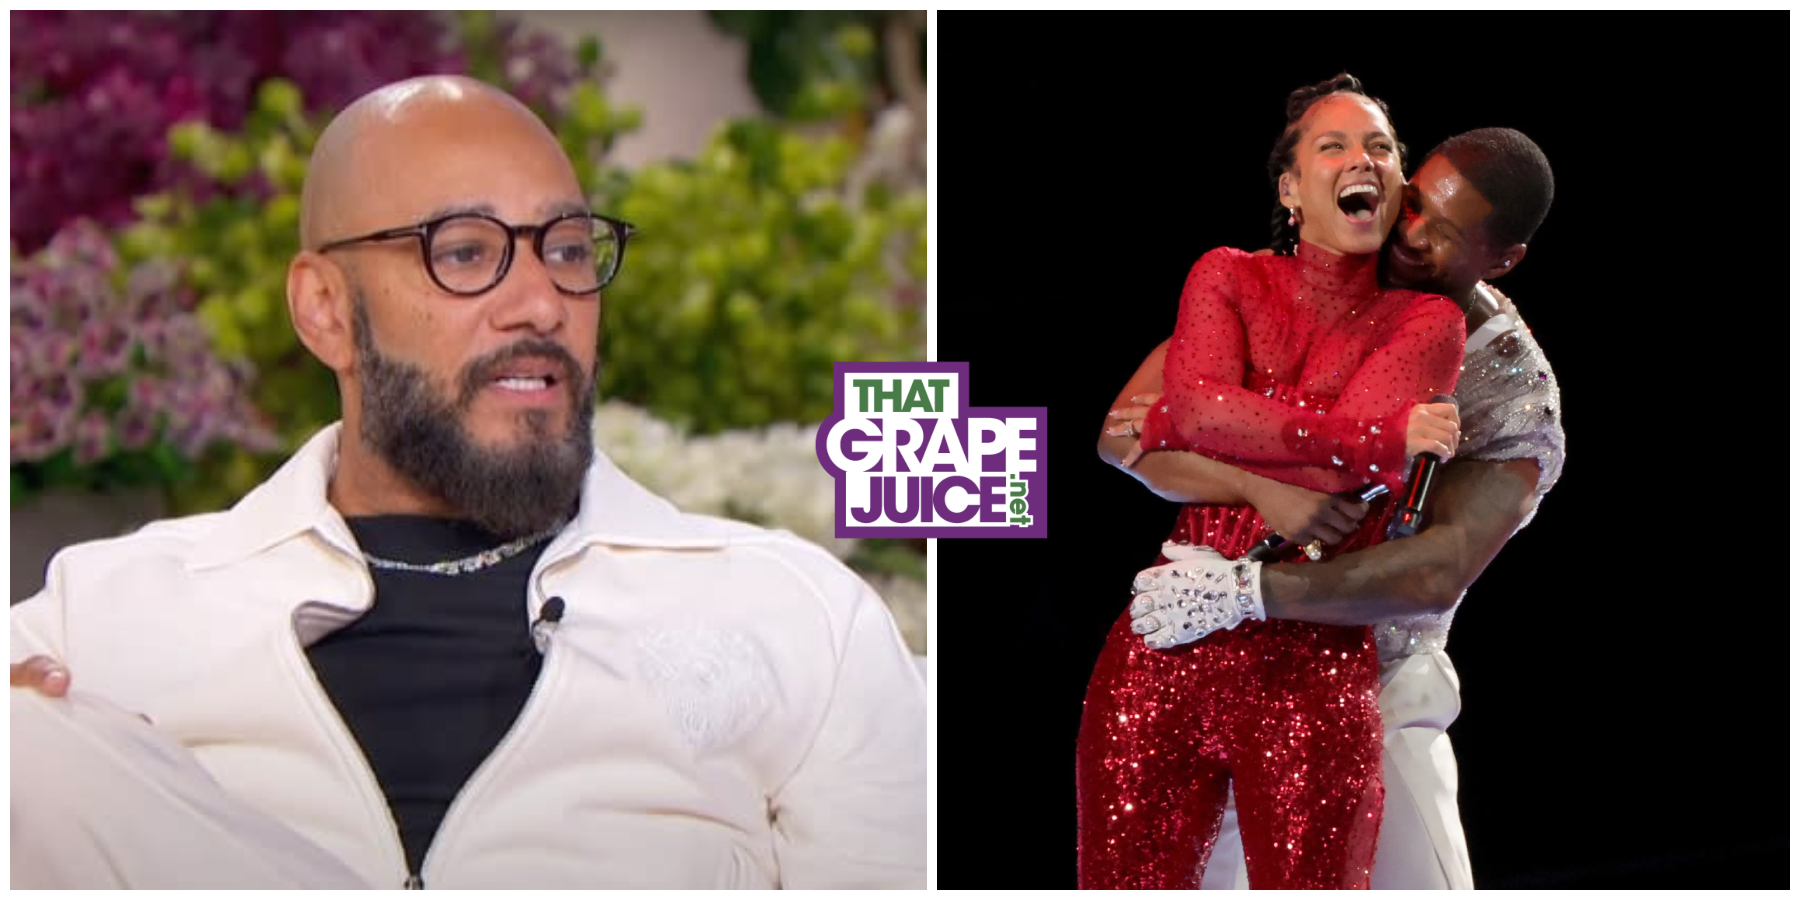 Swizz Beatz Responds to Critics of Usher & Alicia Keys’ Steamy Hug During the Super Bowl: “Y’all Talking About the Wrong Damn Thing!” [#ICYMI]